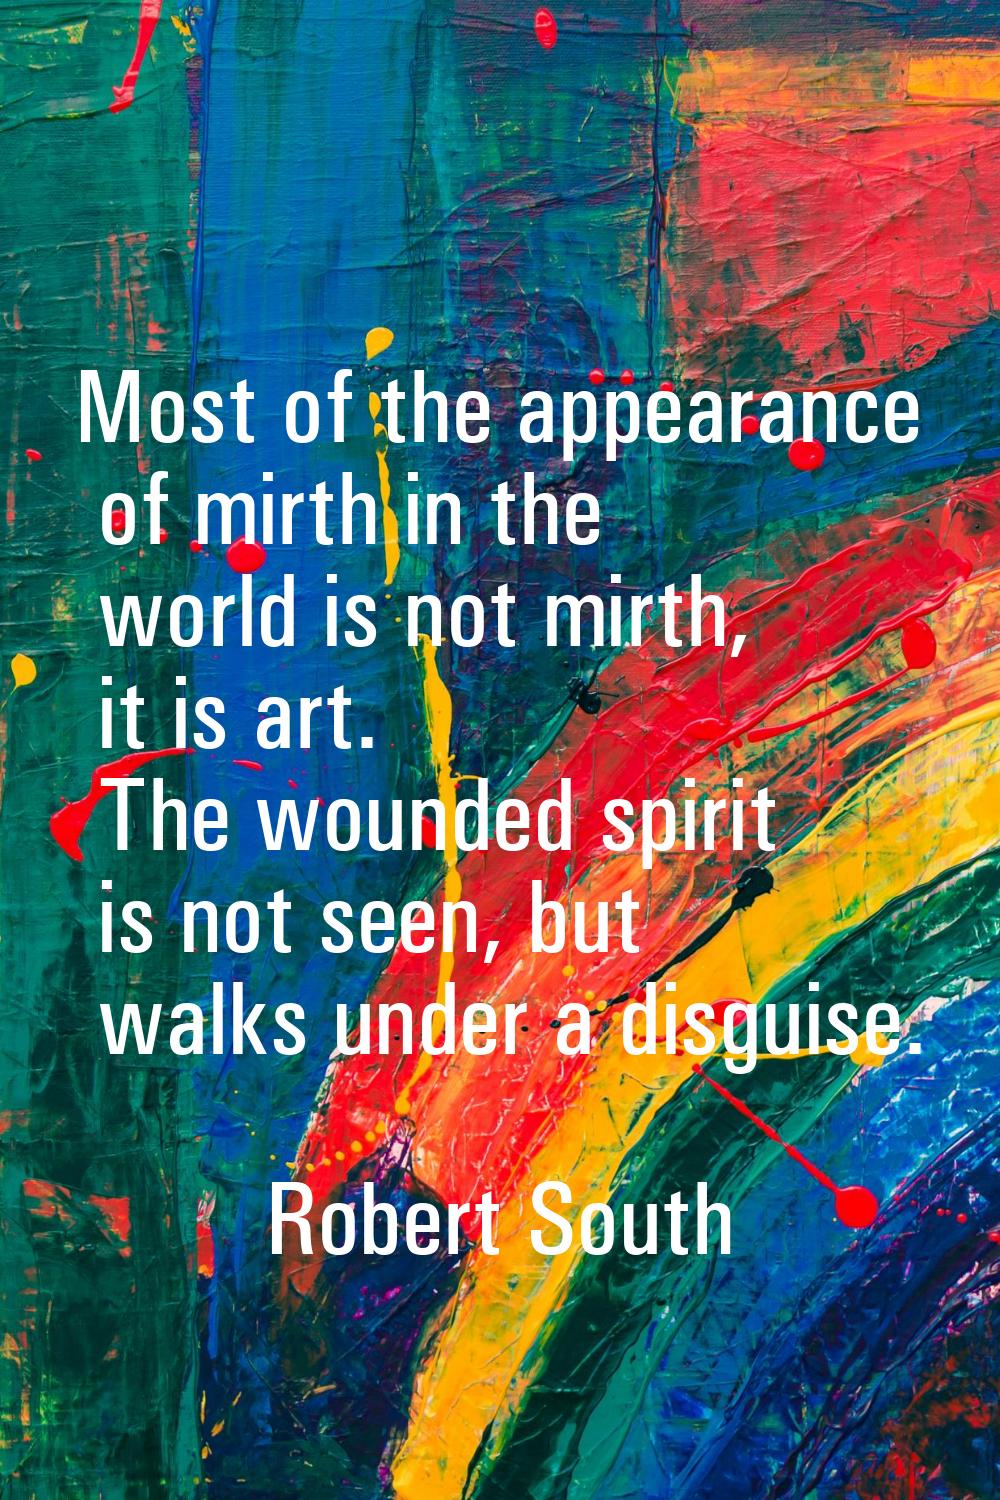 Most of the appearance of mirth in the world is not mirth, it is art. The wounded spirit is not see